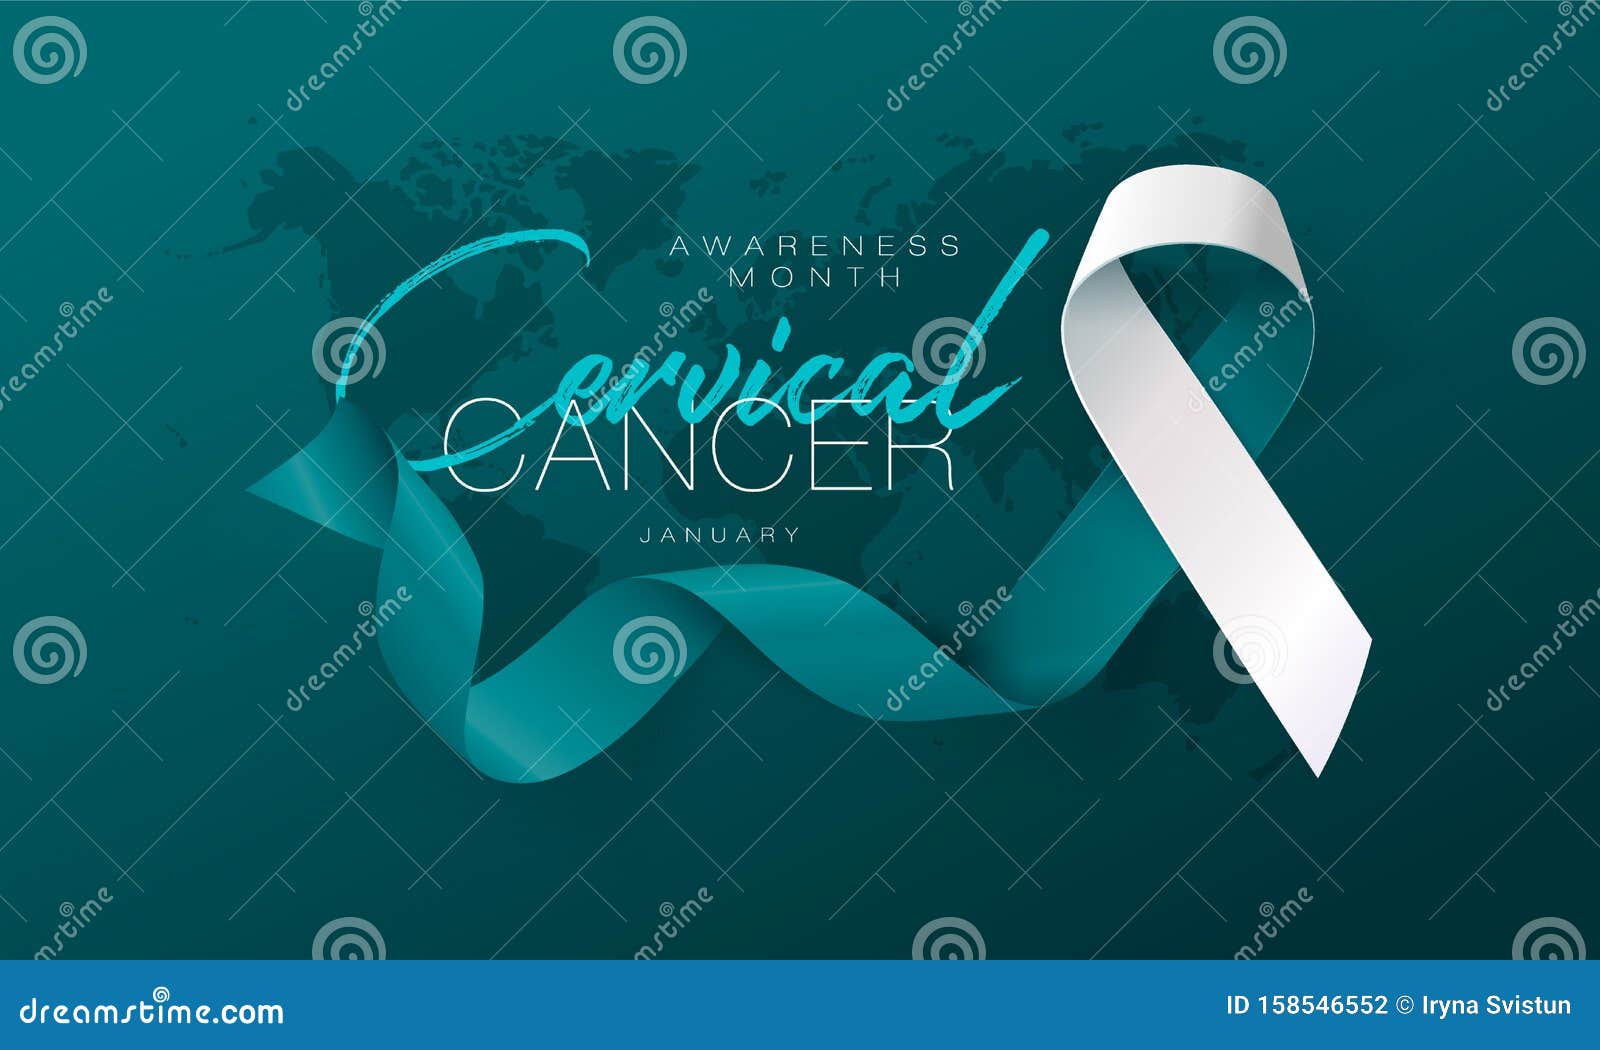 Cervical Cancer Awareness Calligraphy Poster Design. Realistic Teal and ...